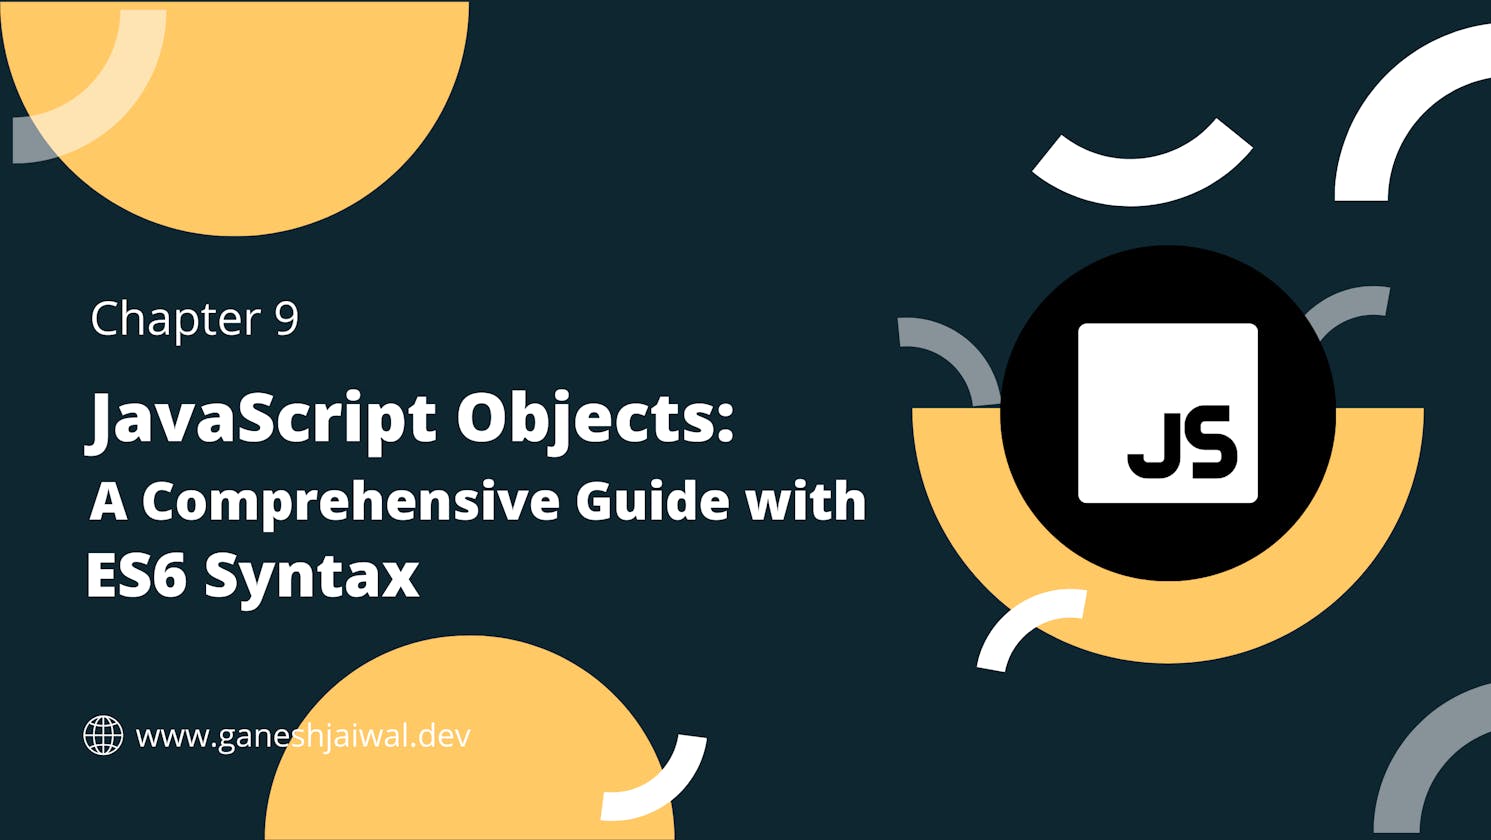 JavaScript Objects: A Comprehensive Guide with ES6 Syntax